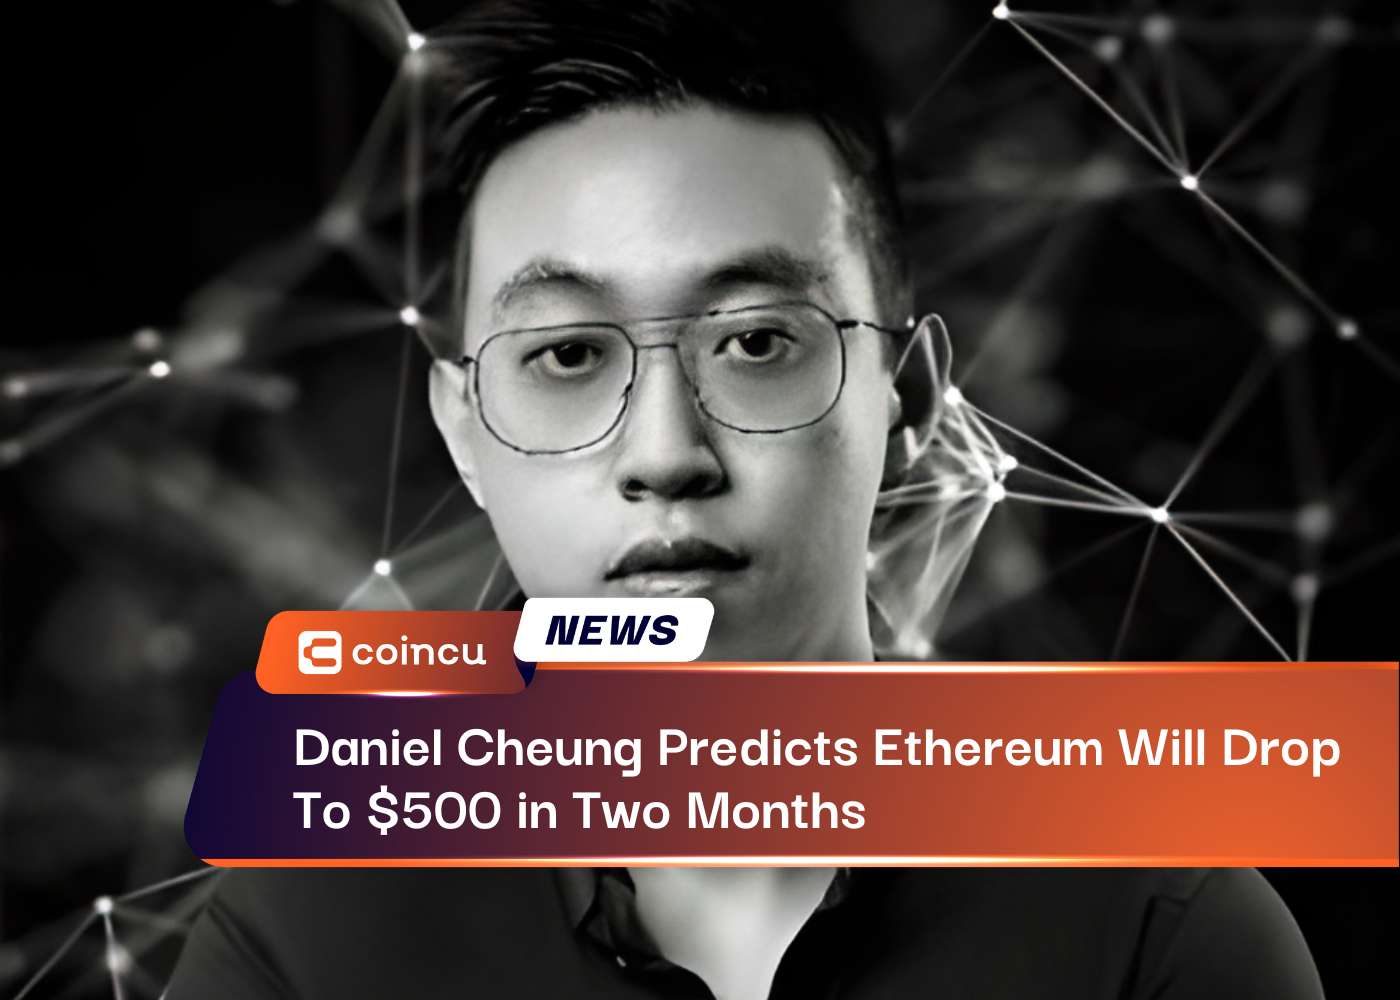 Daniel Cheung Predicts Ethereum Will Drop To $500 in Two Months